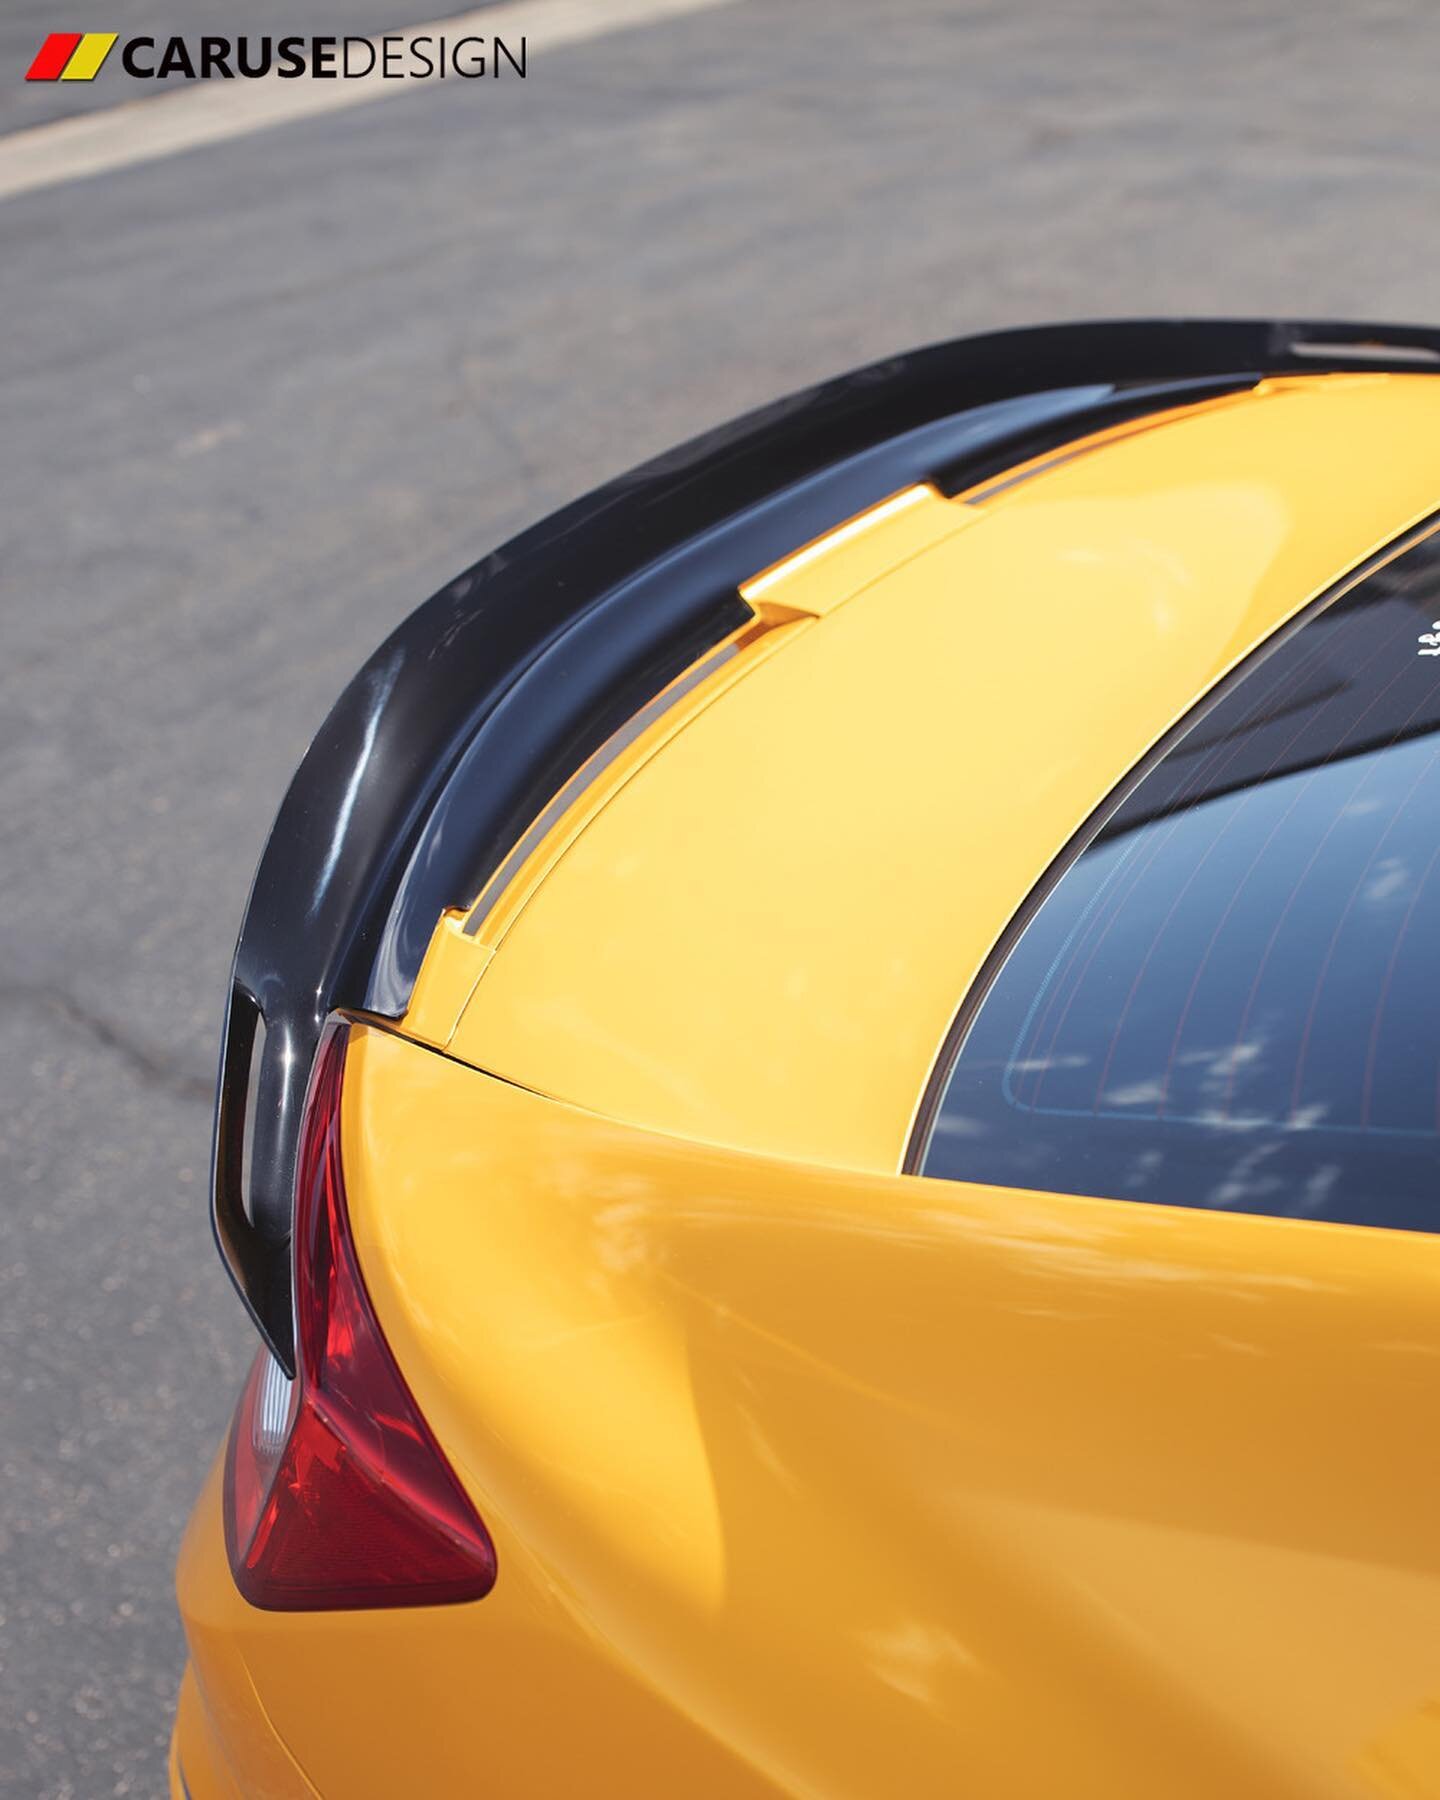 The 15 degree air diffusion vent is the key factor that minimizes vibration and achieves a seamless one piece design without any supporting brackets above the tail light lens.

CAD images swipe 👈

#CaRusedesign #aeroflap #purepassion #hondacivic #ci